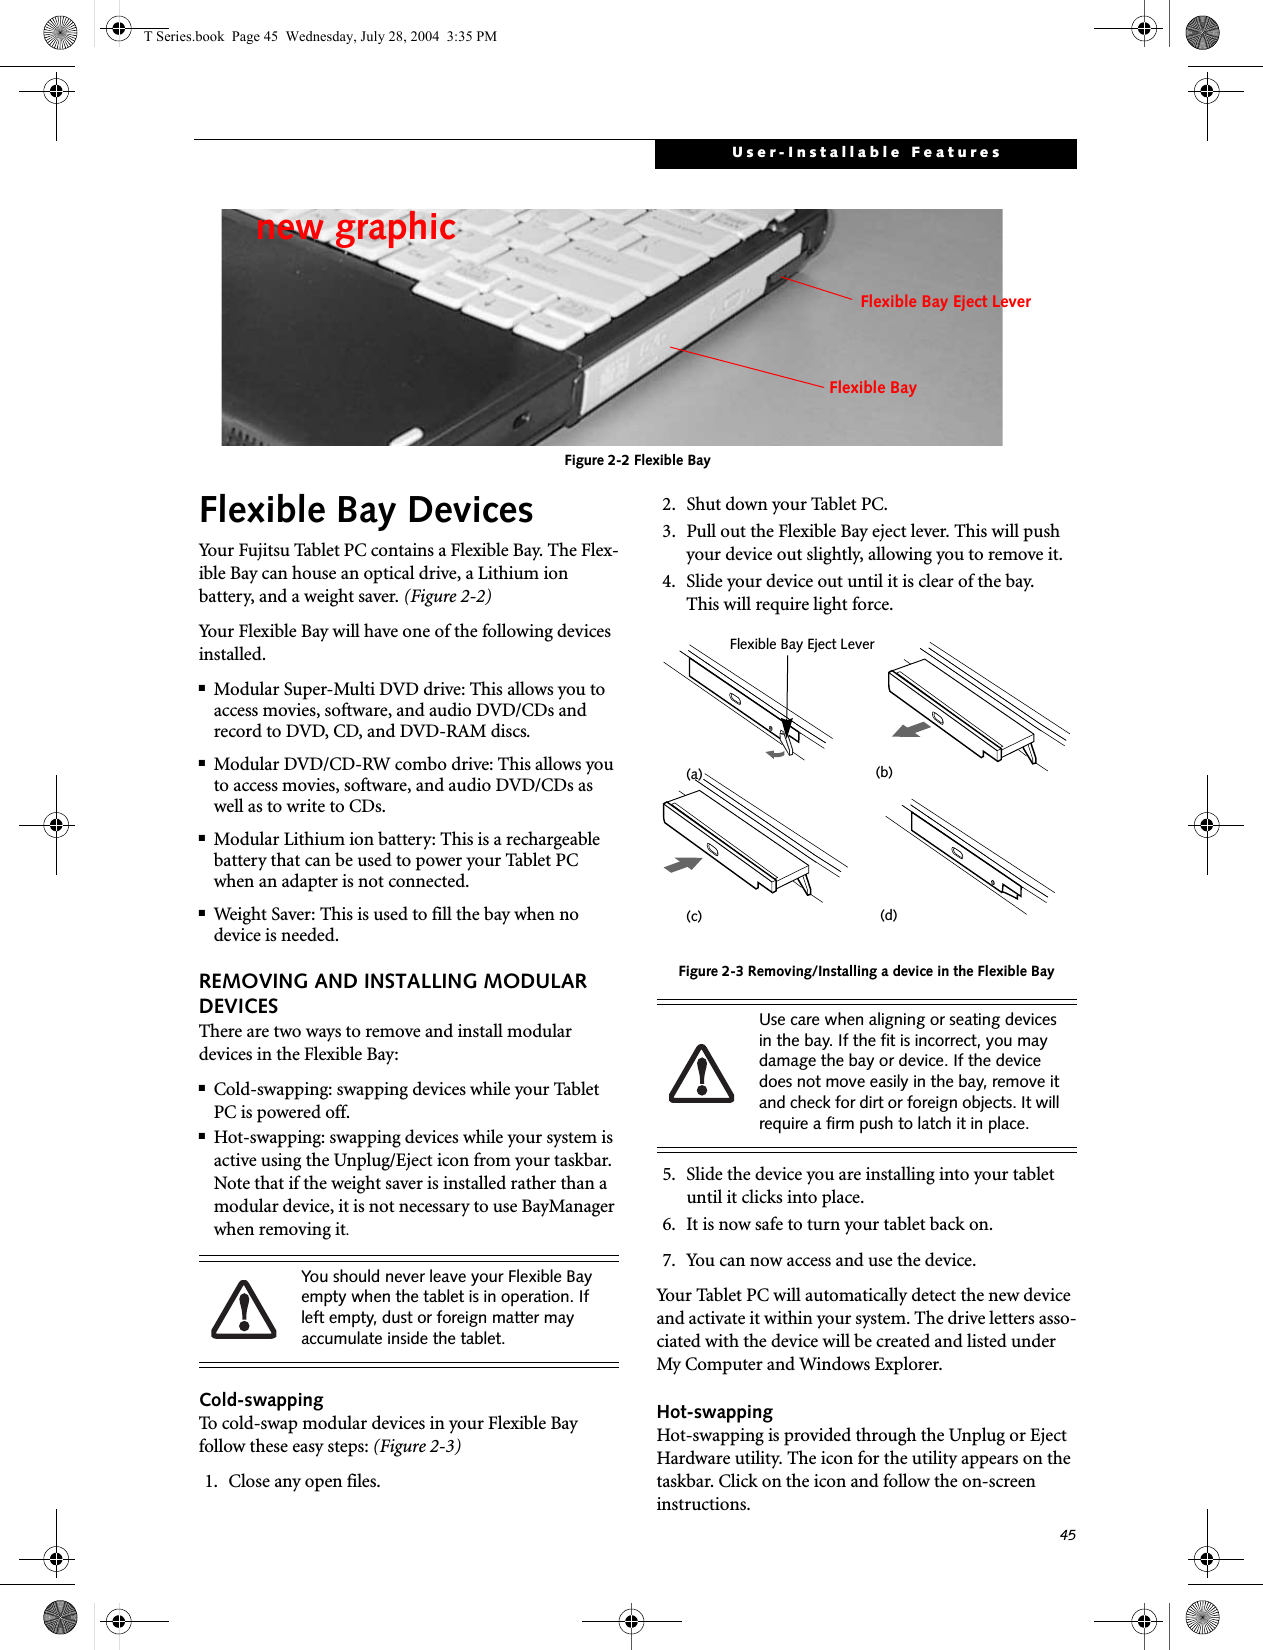 45User-Installable FeaturesFigure 2-2 Flexible BayFlexible Bay DevicesYour Fujitsu Tablet PC contains a Flexible Bay. The Flex-ible Bay can house an optical drive, a Lithium ion battery, and a weight saver. (Figure 2-2)Your Flexible Bay will have one of the following devices installed. ■Modular Super-Multi DVD drive: This allows you to access movies, software, and audio DVD/CDs and record to DVD, CD, and DVD-RAM discs.■Modular DVD/CD-RW combo drive: This allows you to access movies, software, and audio DVD/CDs as well as to write to CDs. ■Modular Lithium ion battery: This is a rechargeablebattery that can be used to power your Tablet PC when an adapter is not connected.■Weight Saver: This is used to fill the bay when no device is needed.REMOVING AND INSTALLING MODULAR DEVICES There are two ways to remove and install modular devices in the Flexible Bay:■Cold-swapping: swapping devices while your Tablet PC is powered off.■Hot-swapping: swapping devices while your system is active using the Unplug/Eject icon from your taskbar. Note that if the weight saver is installed rather than a modular device, it is not necessary to use BayManager when removing it.Cold-swappingTo cold-swap modular devices in your Flexible Bay follow these easy steps: (Figure 2-3)1. Close any open files.2. Shut down your Tablet PC.3. Pull out the Flexible Bay eject lever. This will push your device out slightly, allowing you to remove it.4. Slide your device out until it is clear of the bay.This will require light force. Figure 2-3 Removing/Installing a device in the Flexible Bay5. Slide the device you are installing into your tablet until it clicks into place.6. It is now safe to turn your tablet back on.7. You can now access and use the device.Your Tablet PC will automatically detect the new device and activate it within your system. The drive letters asso-ciated with the device will be created and listed under My Computer and Windows Explorer. Hot-swapping Hot-swapping is provided through the Unplug or Eject Hardware utility. The icon for the utility appears on the taskbar. Click on the icon and follow the on-screen instructions.new graphicFlexible BayFlexible Bay Eject LeverYou should never leave your Flexible Bay empty when the tablet is in operation. If left empty, dust or foreign matter may accumulate inside the tablet.Use care when aligning or seating devices in the bay. If the fit is incorrect, you may damage the bay or device. If the device does not move easily in the bay, remove it and check for dirt or foreign objects. It will require a firm push to latch it in place.(a) (b)Flexible Bay Eject Lever(d)(c)T Series.book  Page 45  Wednesday, July 28, 2004  3:35 PM